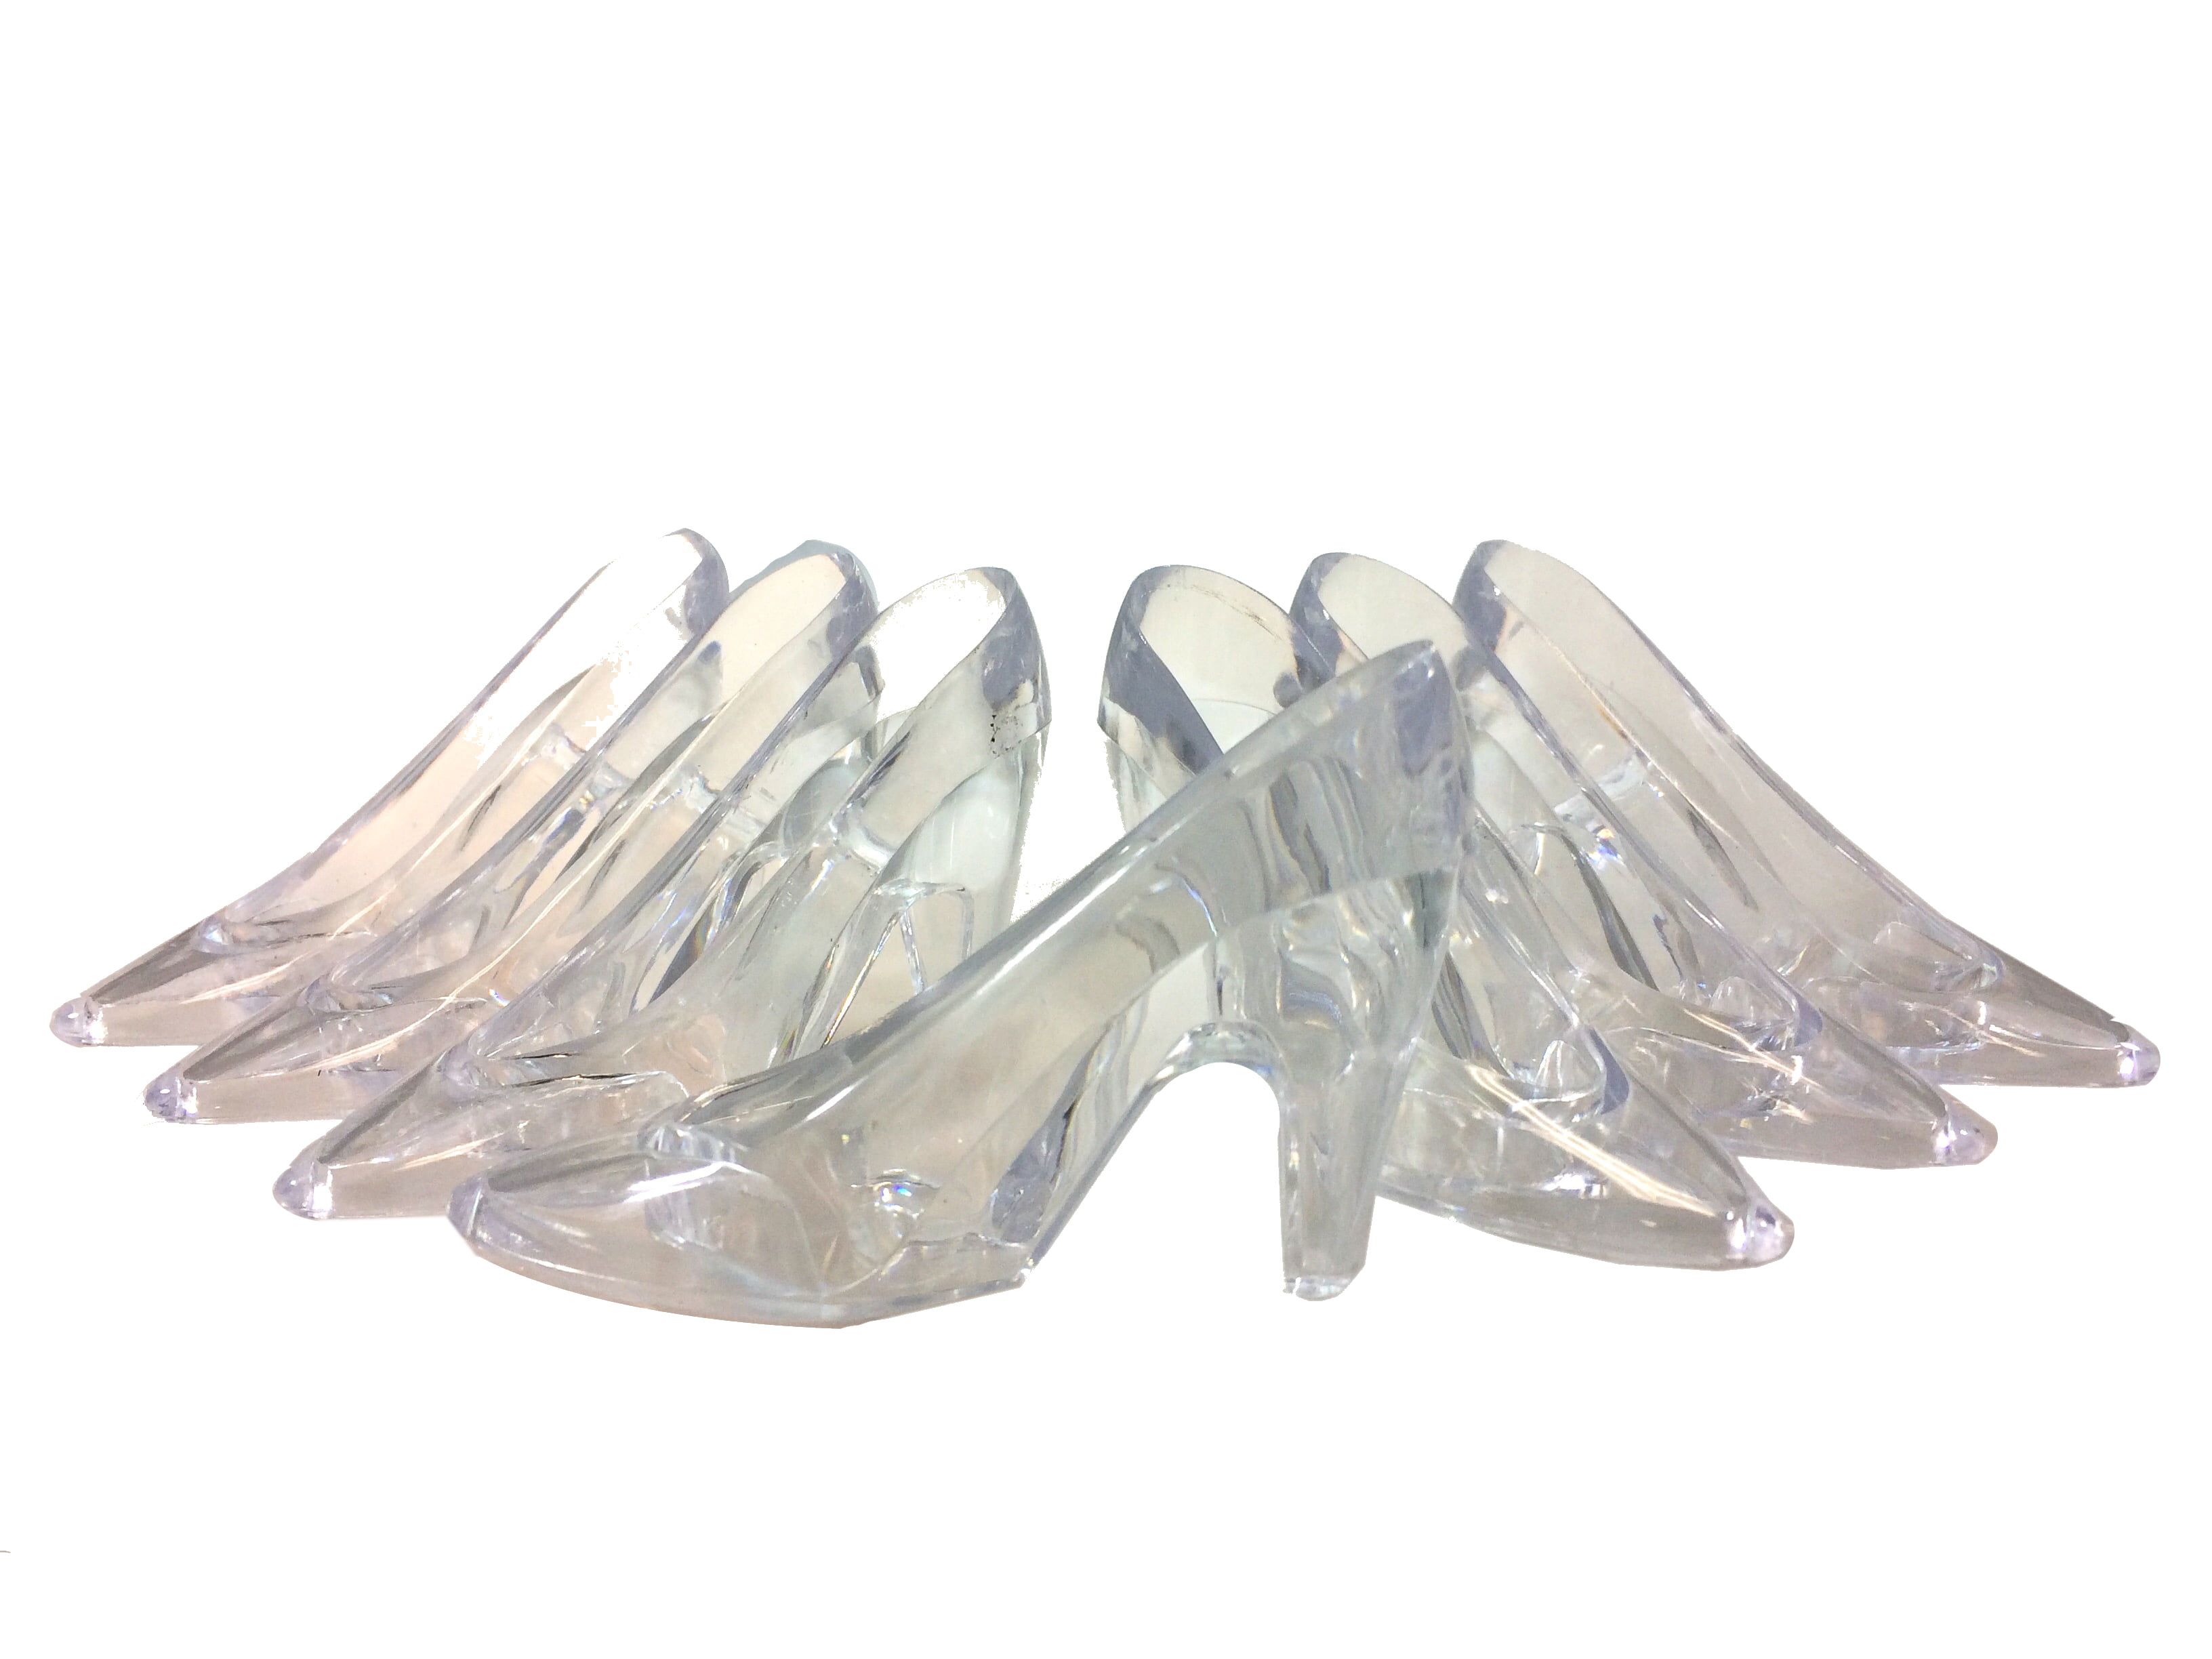 Cinderella Glass Slipper, Colorful Transparent Crystal Glass Shoe  Decoration, Ideal for Cinderella Party Decor, Girls Birthday Gift, Wedding  Centerpiece, Princess Bedroom Decor, Cake Top Decor, Colorful, 5.1 x 2.4 x  4.3 inches 